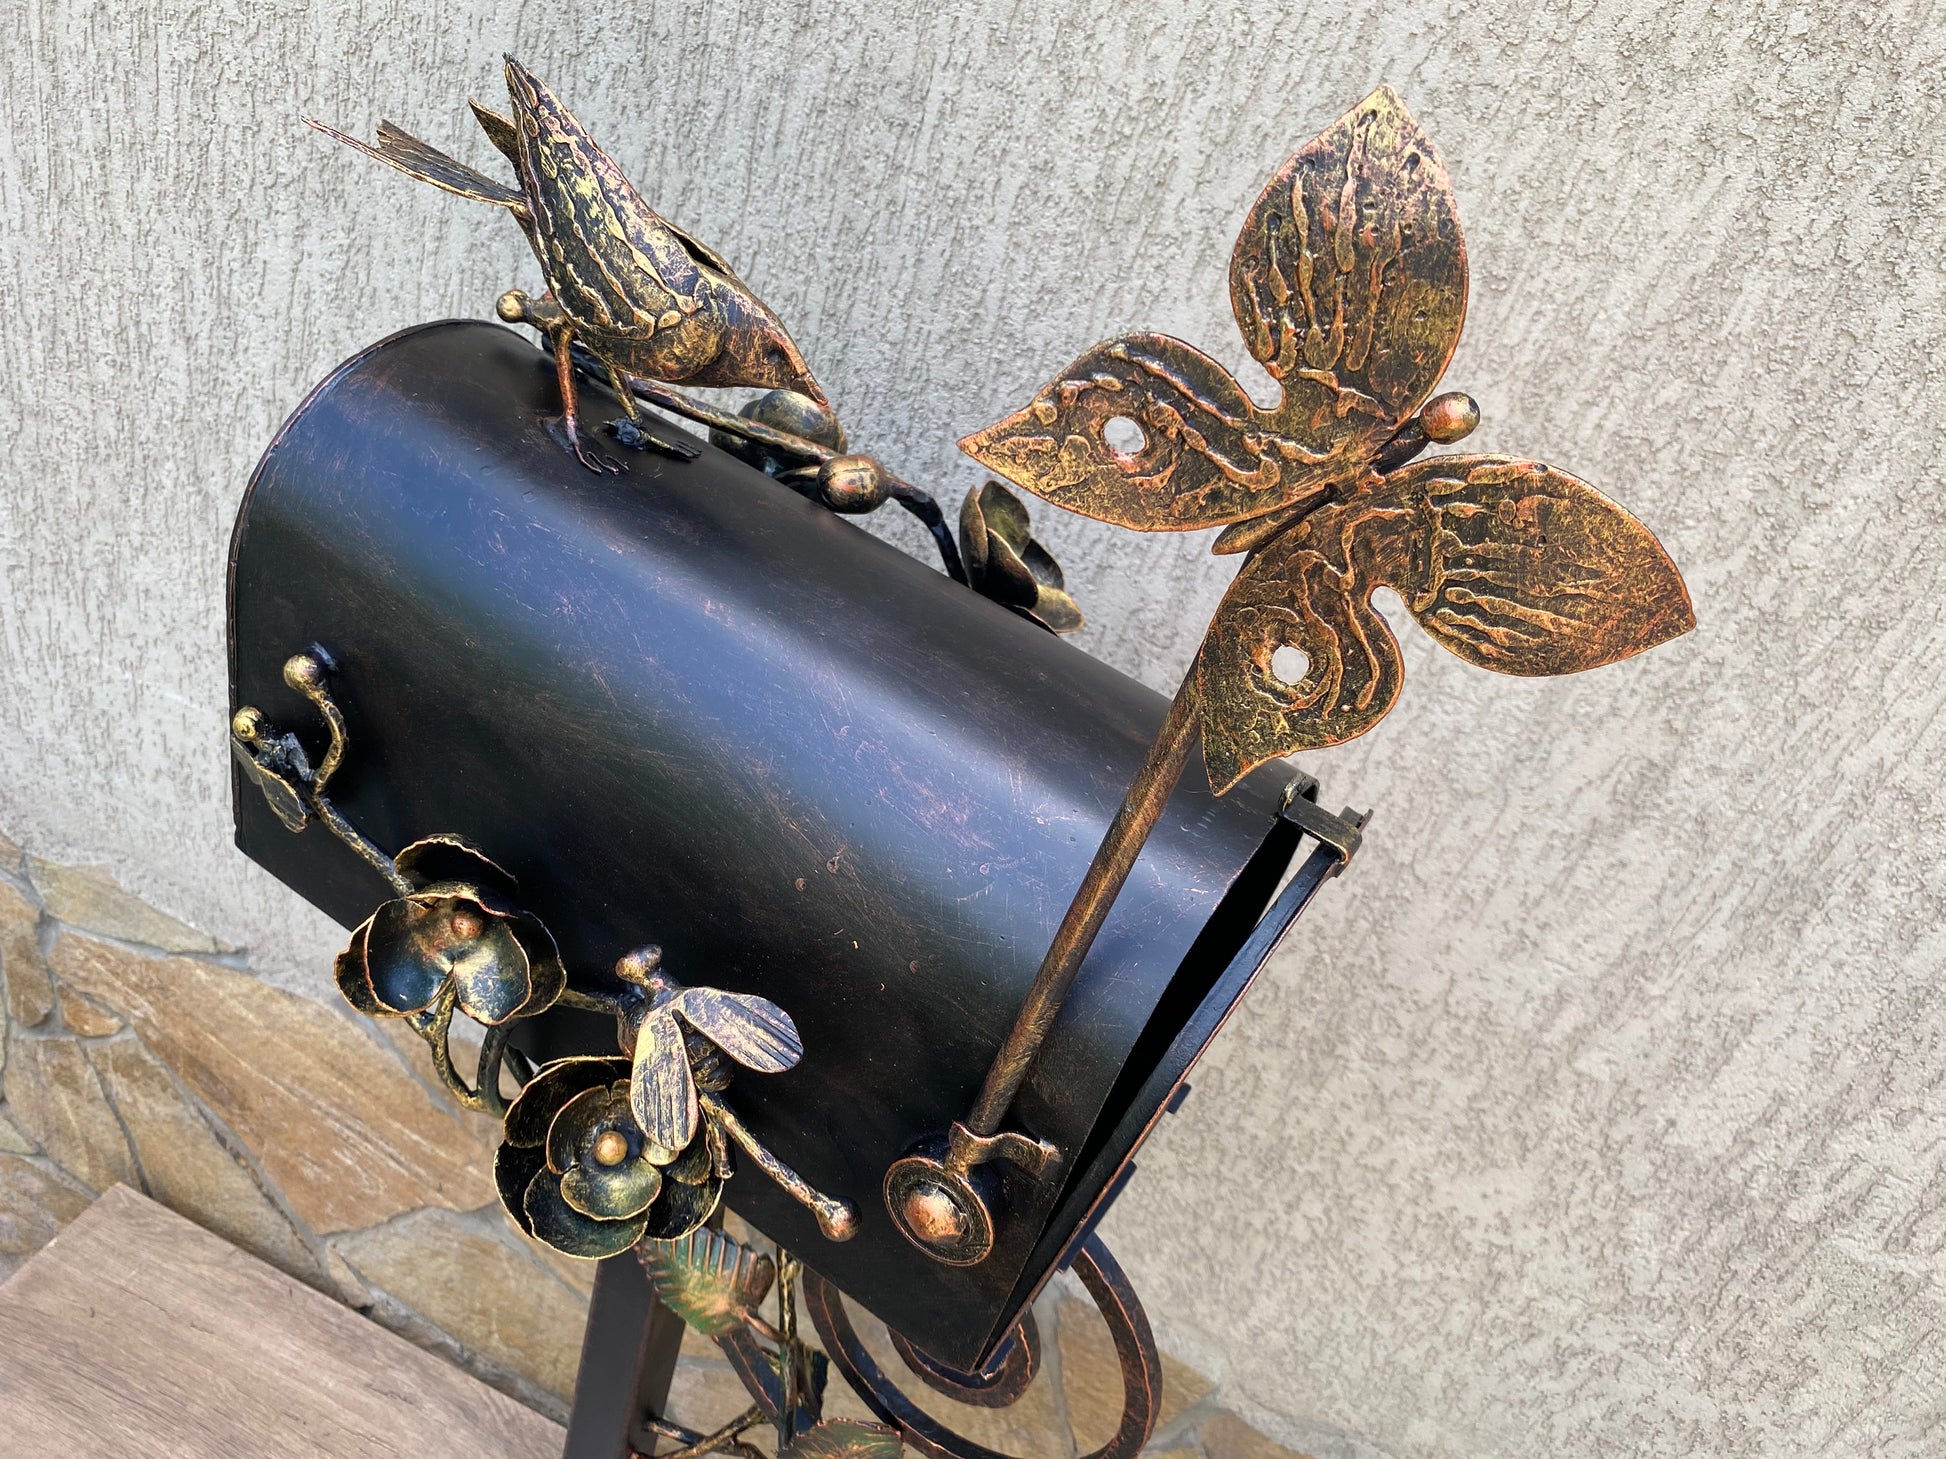 Mailbox, mail box, orchid, bird, floral decor, newlyweds gift, wedding, Christmas, gift for mom, iron gift, anniversary gift, birthday gift